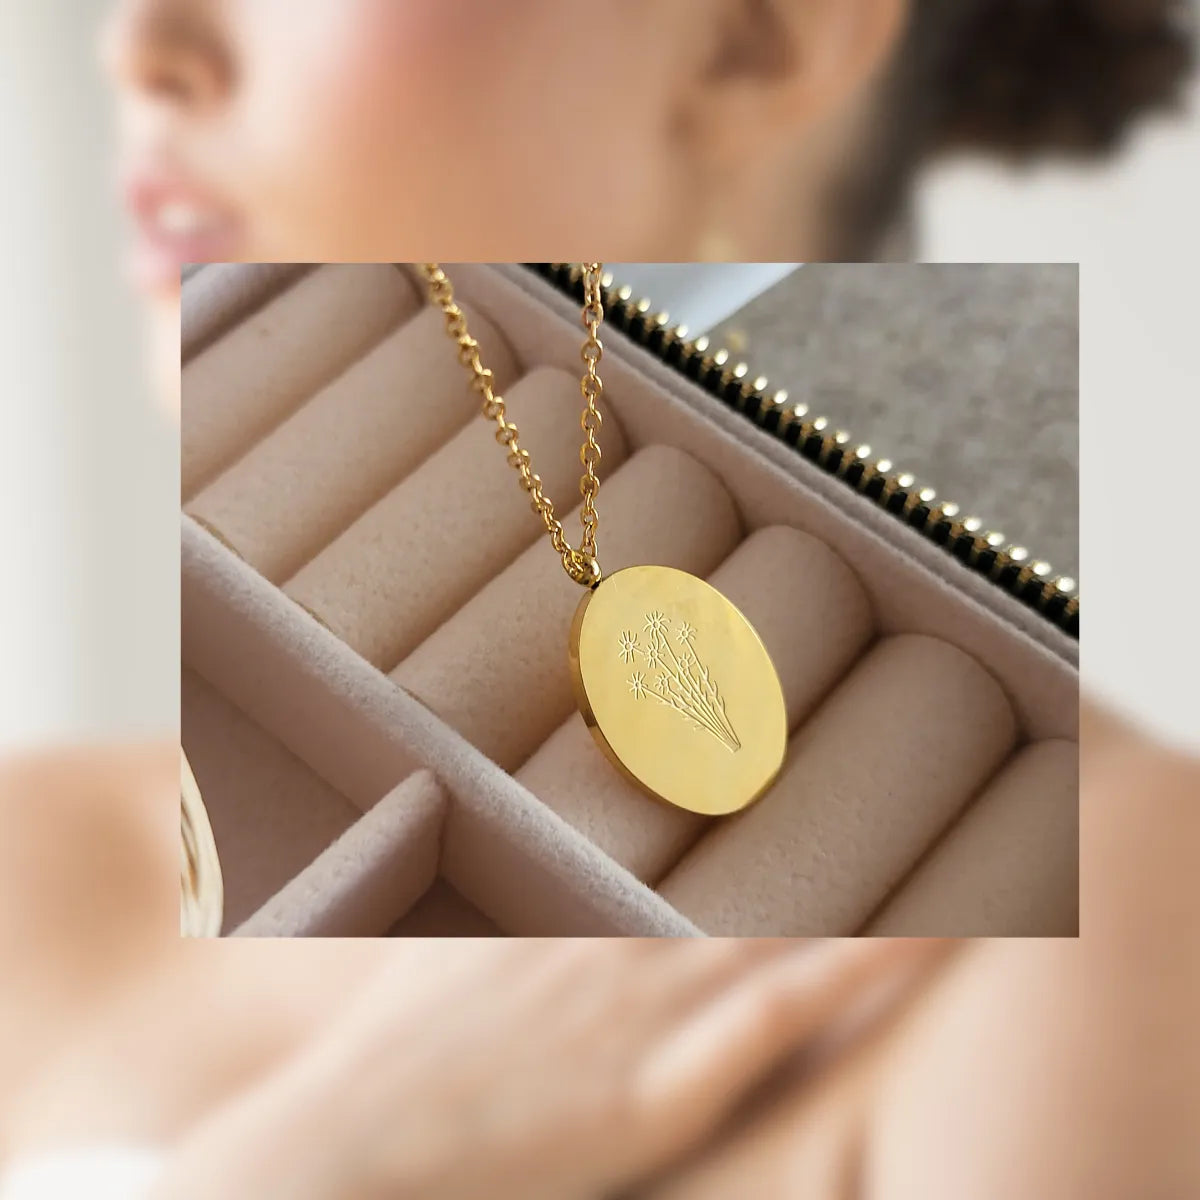 An image showcasing a gold handmade necklace pendant with a plant engraved on top, showcasing the customizable aspect of handmade jewelry.